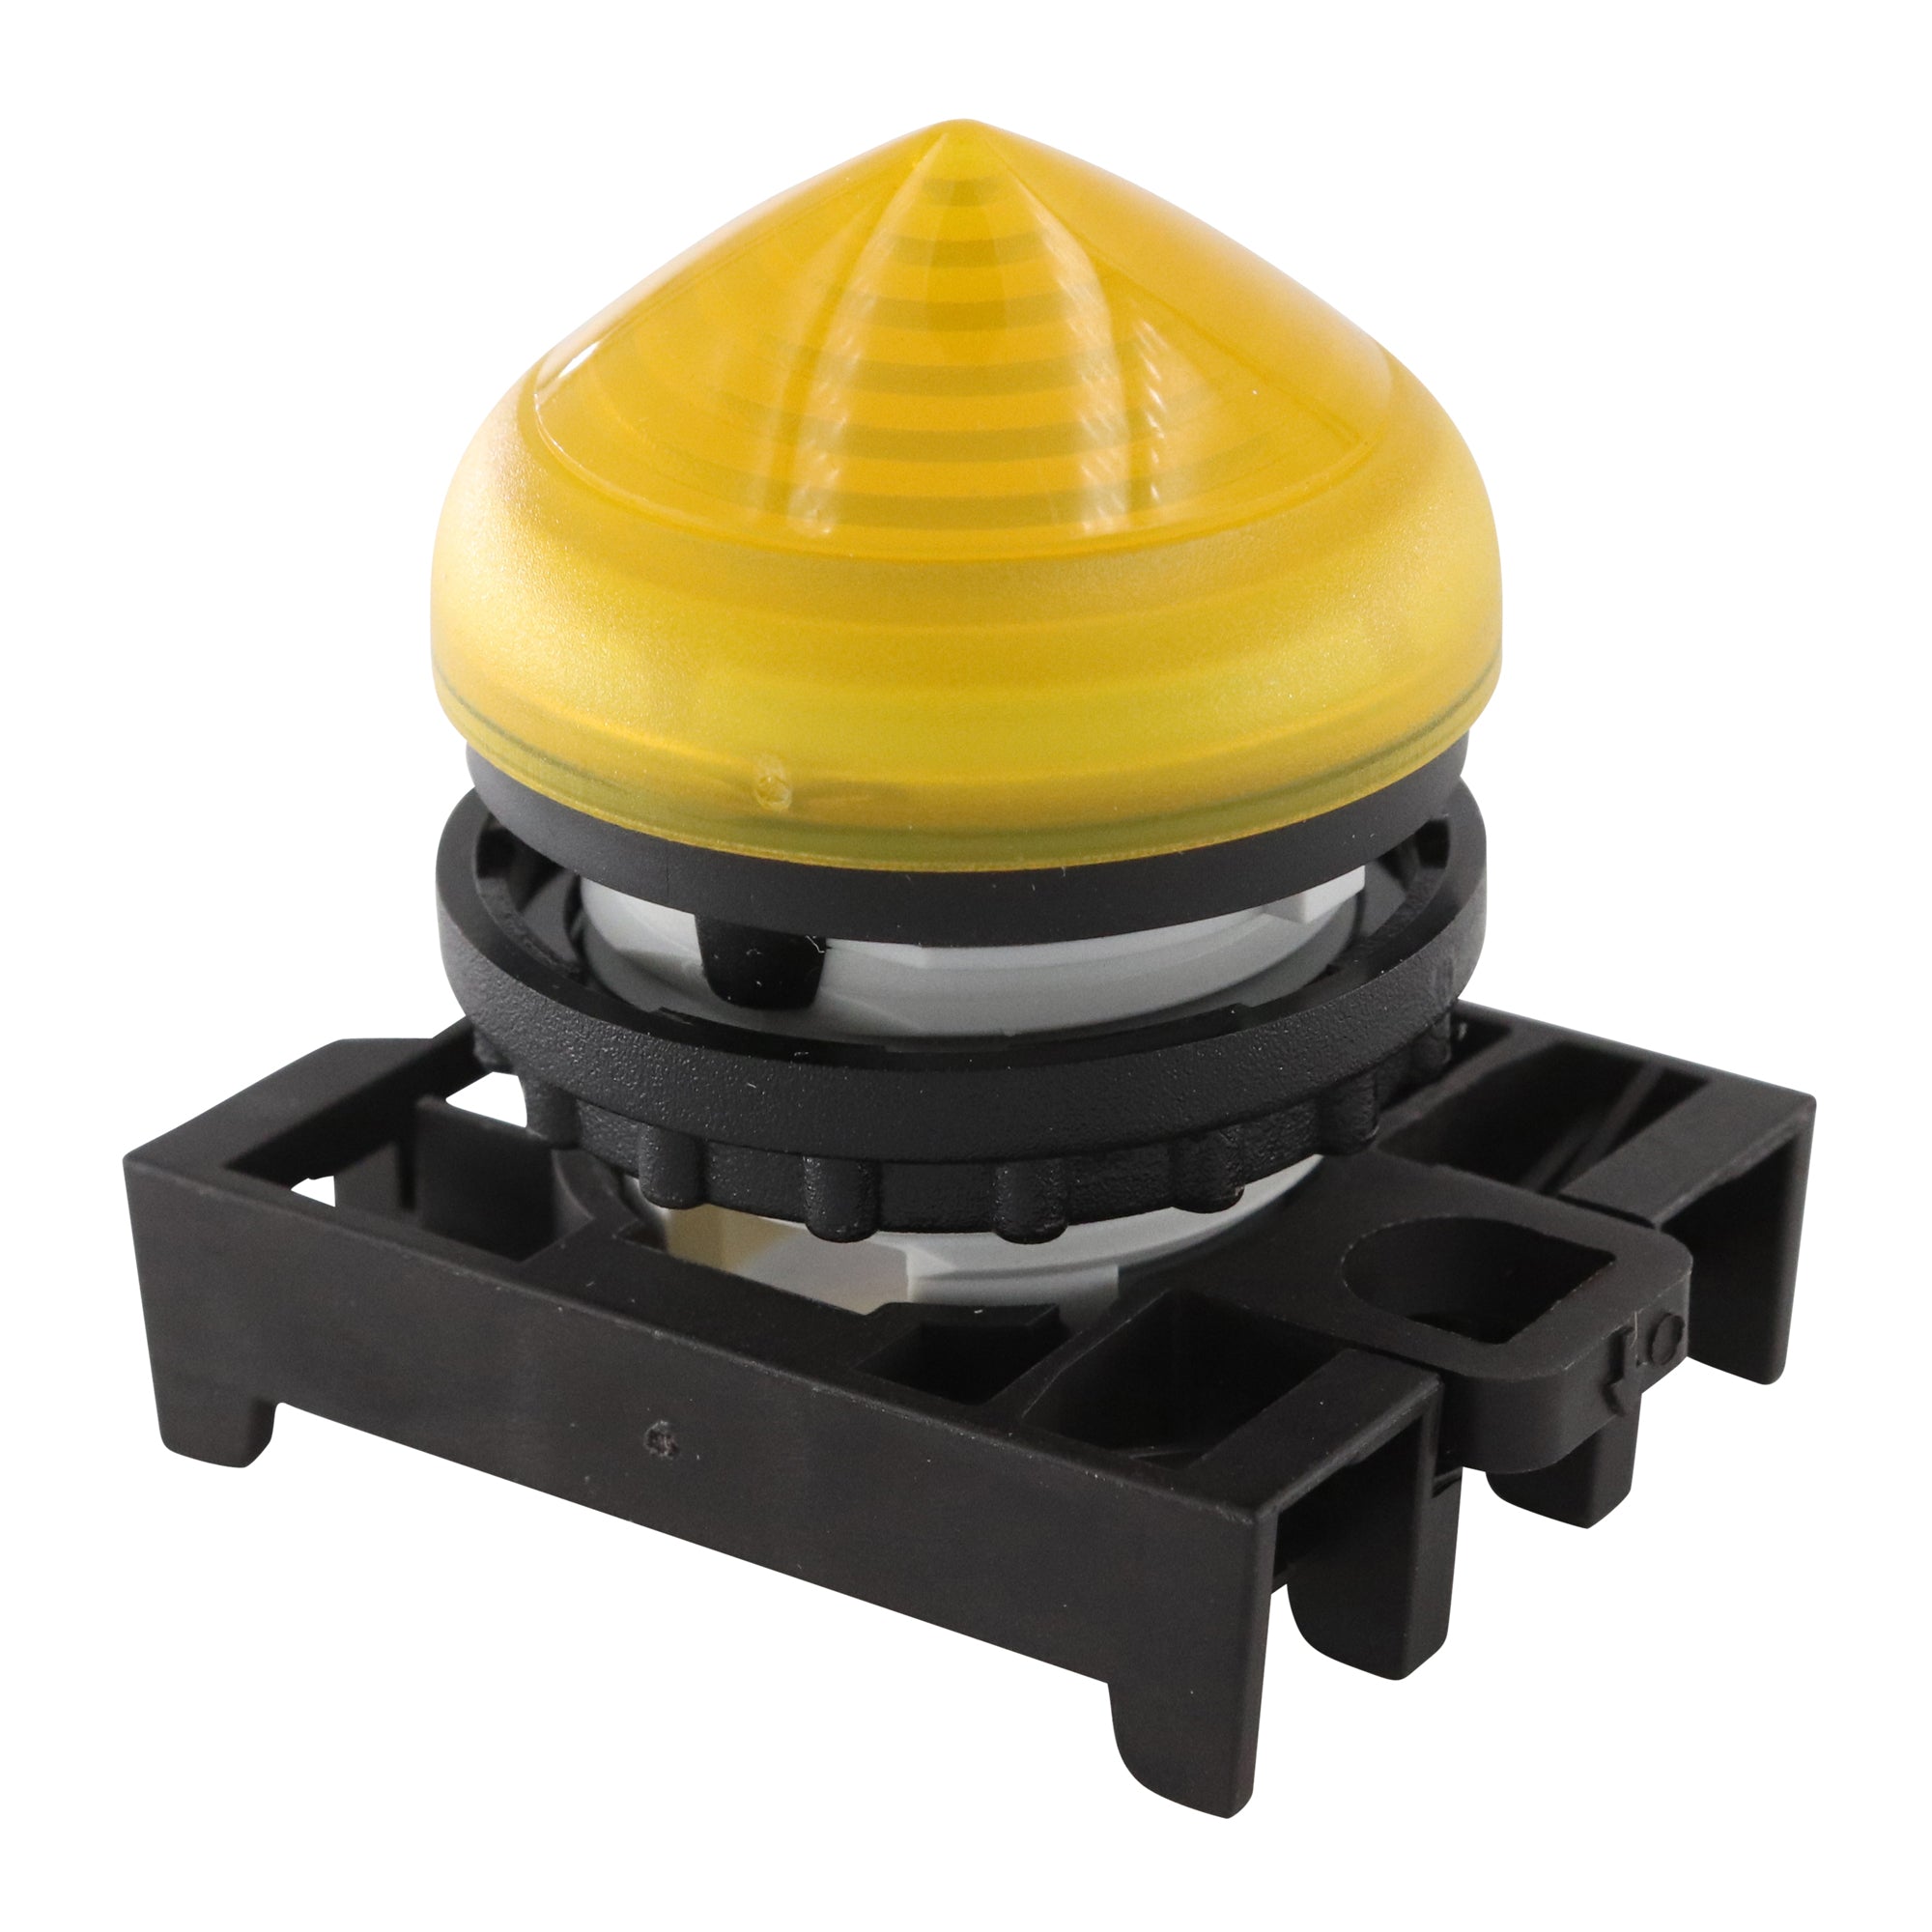 EATON, EATON M22-LH-Y INDICATOR LIGHT PUSH-BUTTON, CONICAL DOME, 22MM, YELLOW